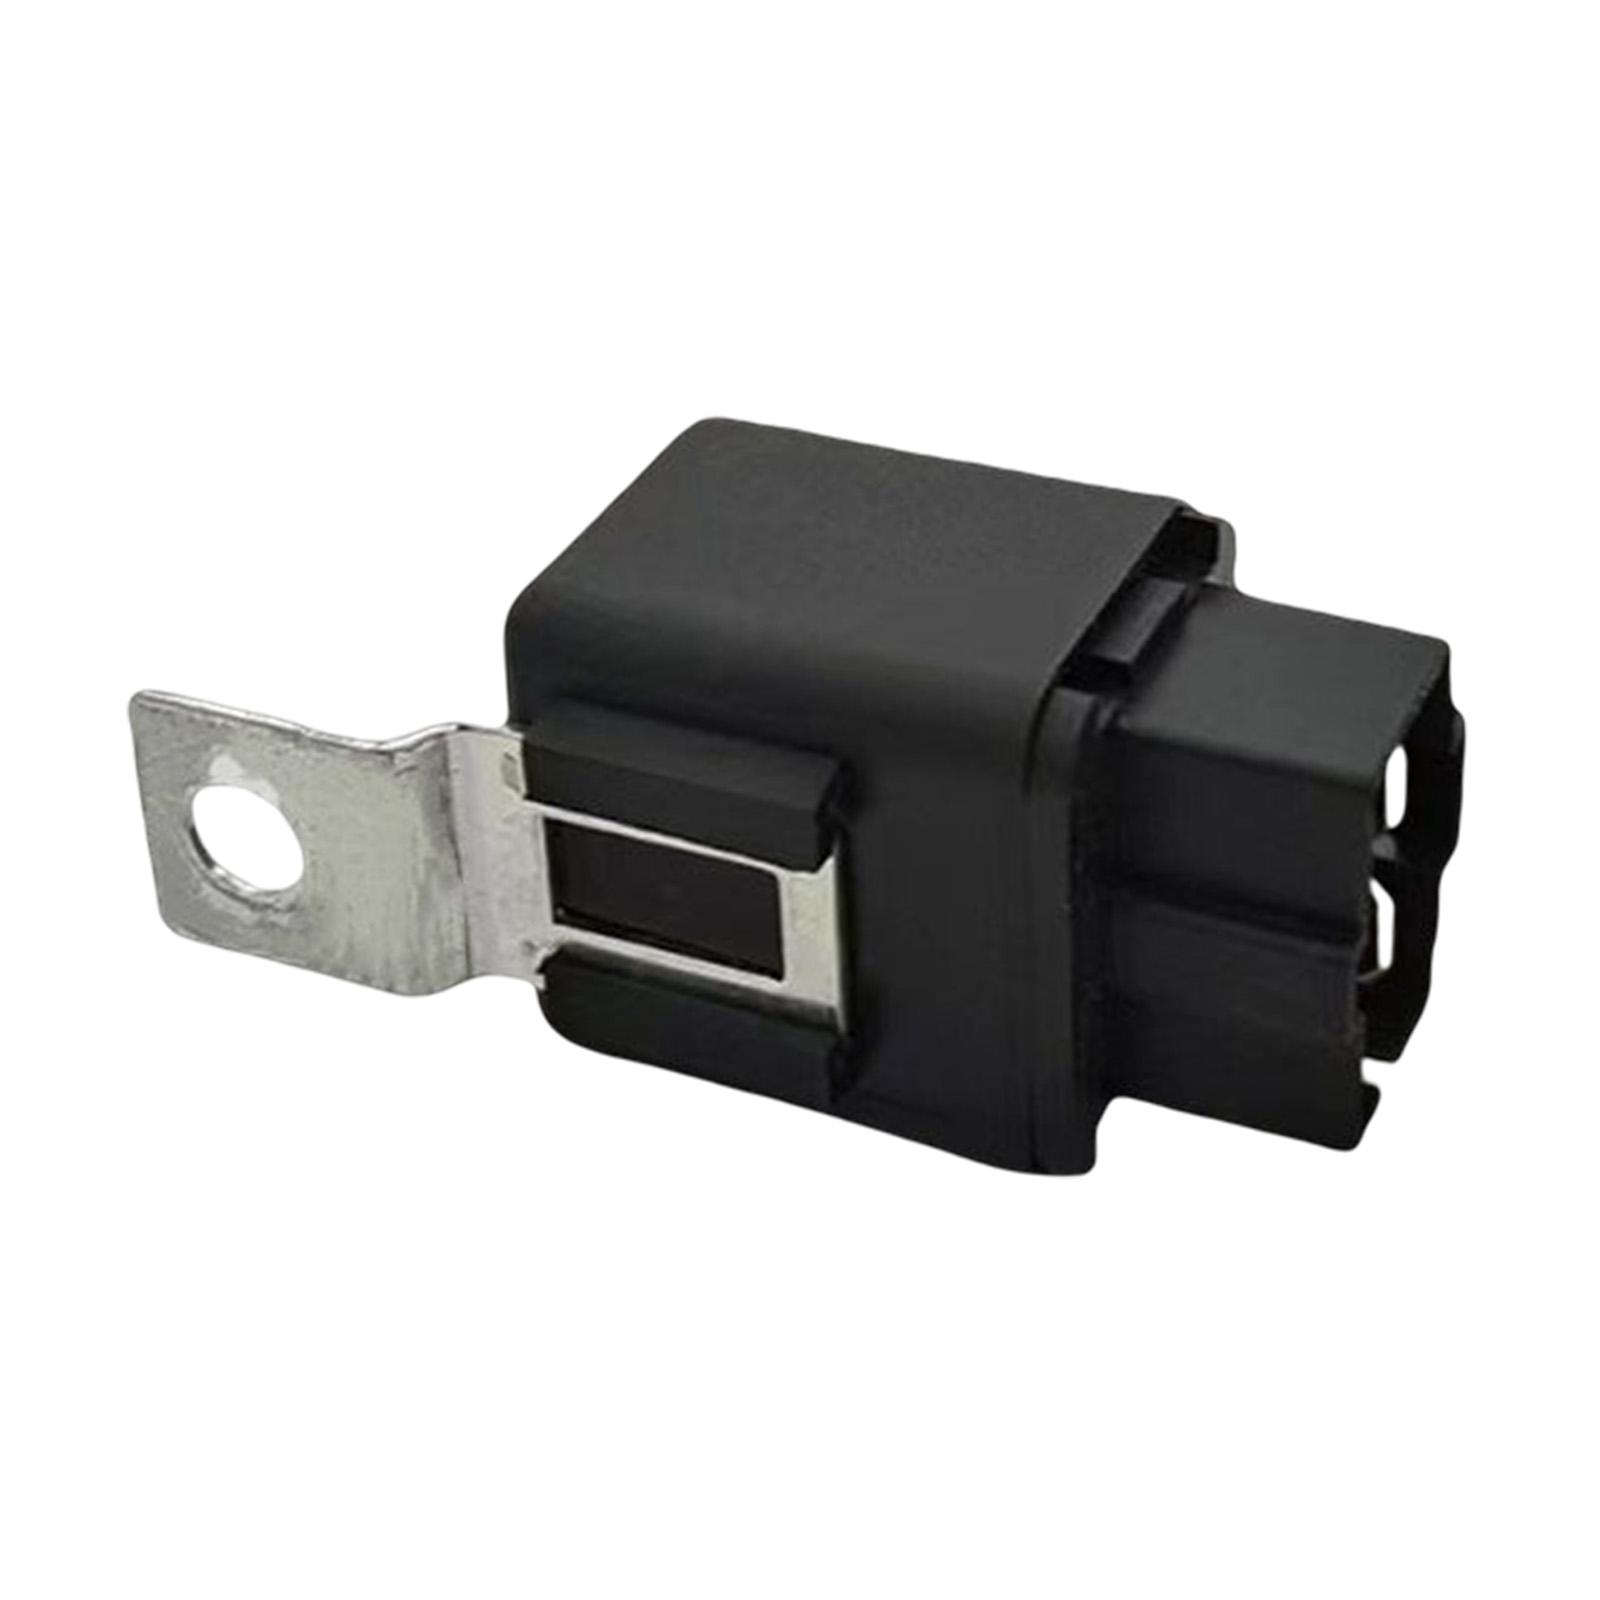 Automotive Relay Accessories Replacement for Air Conditioning Vehicles 24V relay